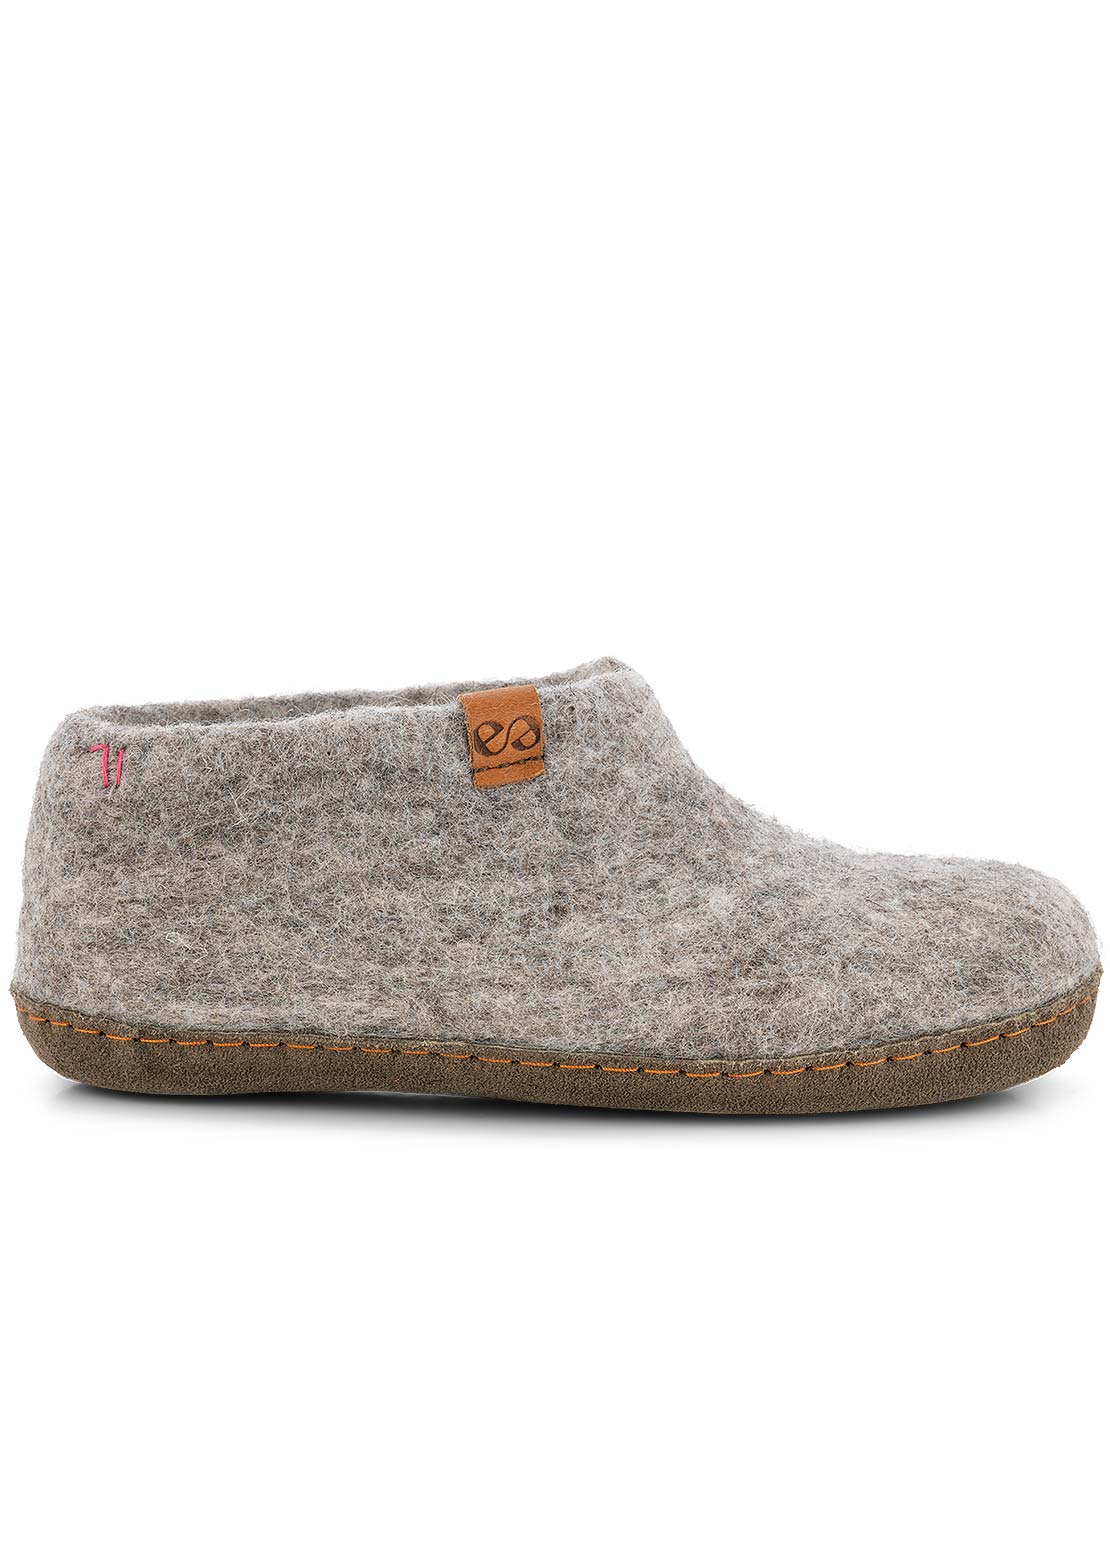 Wool by Green Unisex Mera Suede Sole Shoes Light Grey